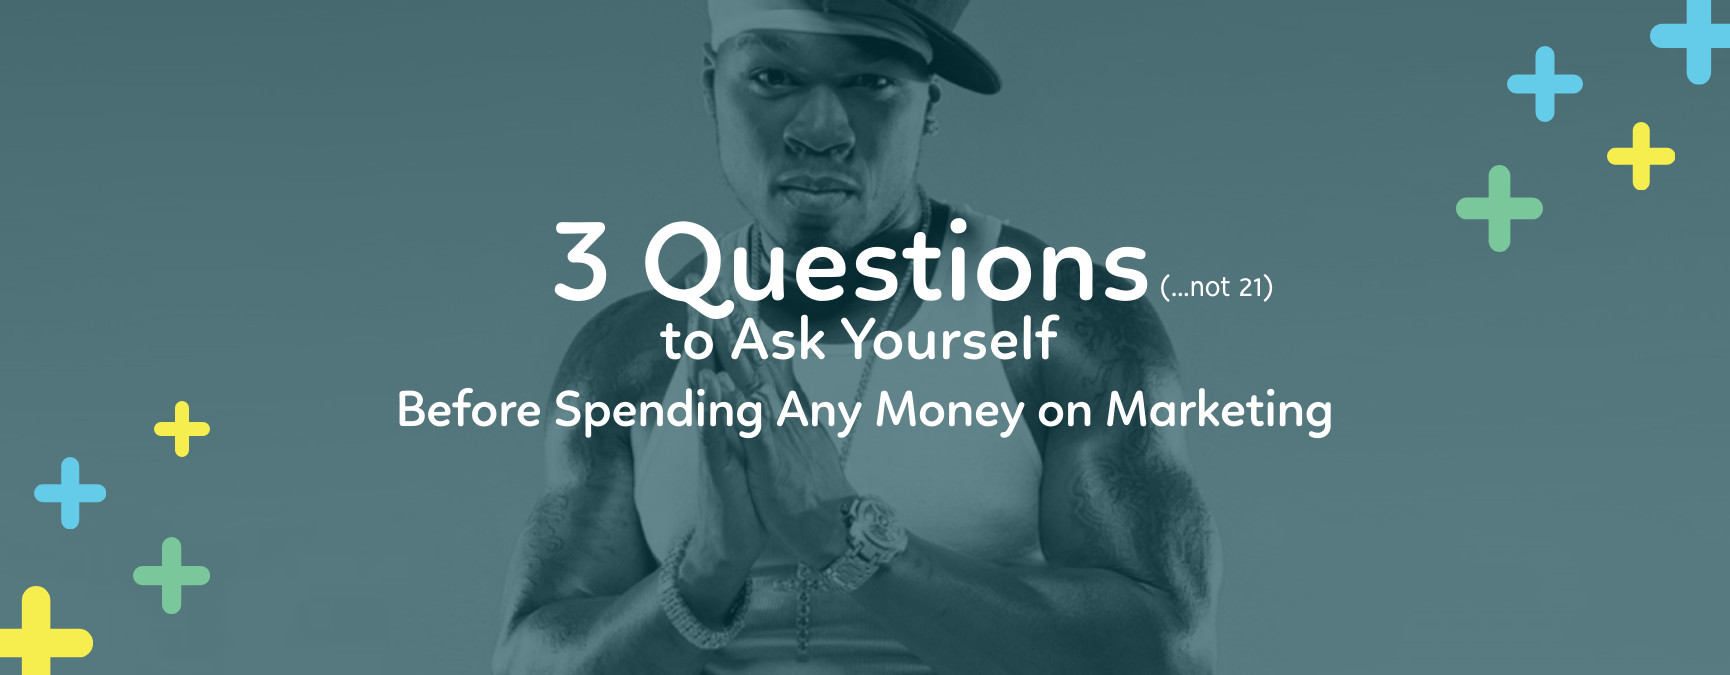 Banner - 3 Questions to Ask Yourself Before Spending Any Money on Marketing